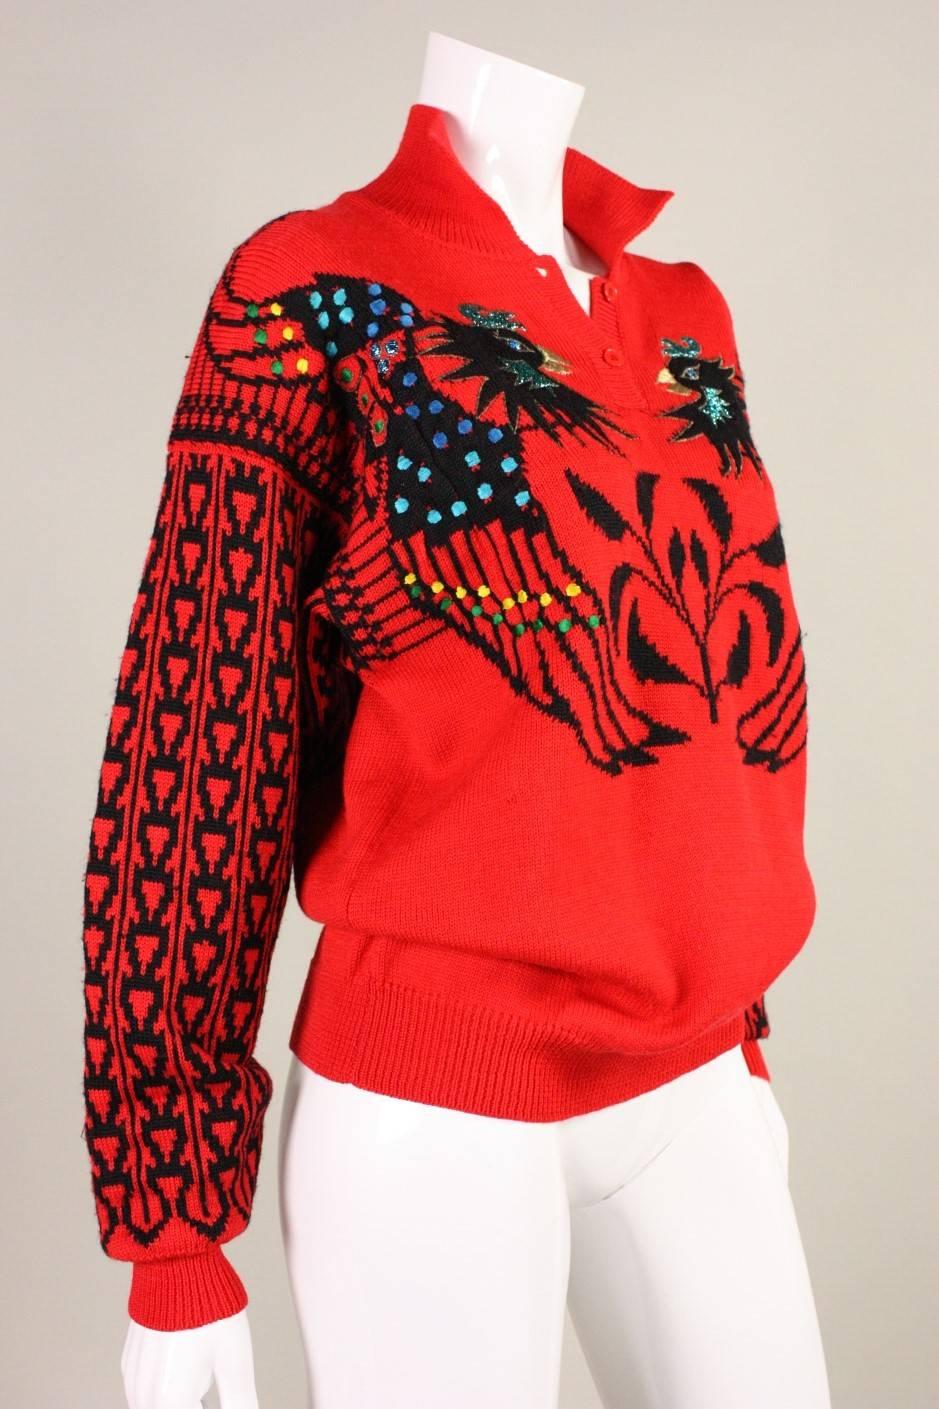 Vintage sweater from Kansai Yamamoto dates to the 1980's and is made of a red wool or wool blend.  It depicts phoenix birds that are decorated with multicolored embroidery.  Two button closure at neck.  Unlined.

No size